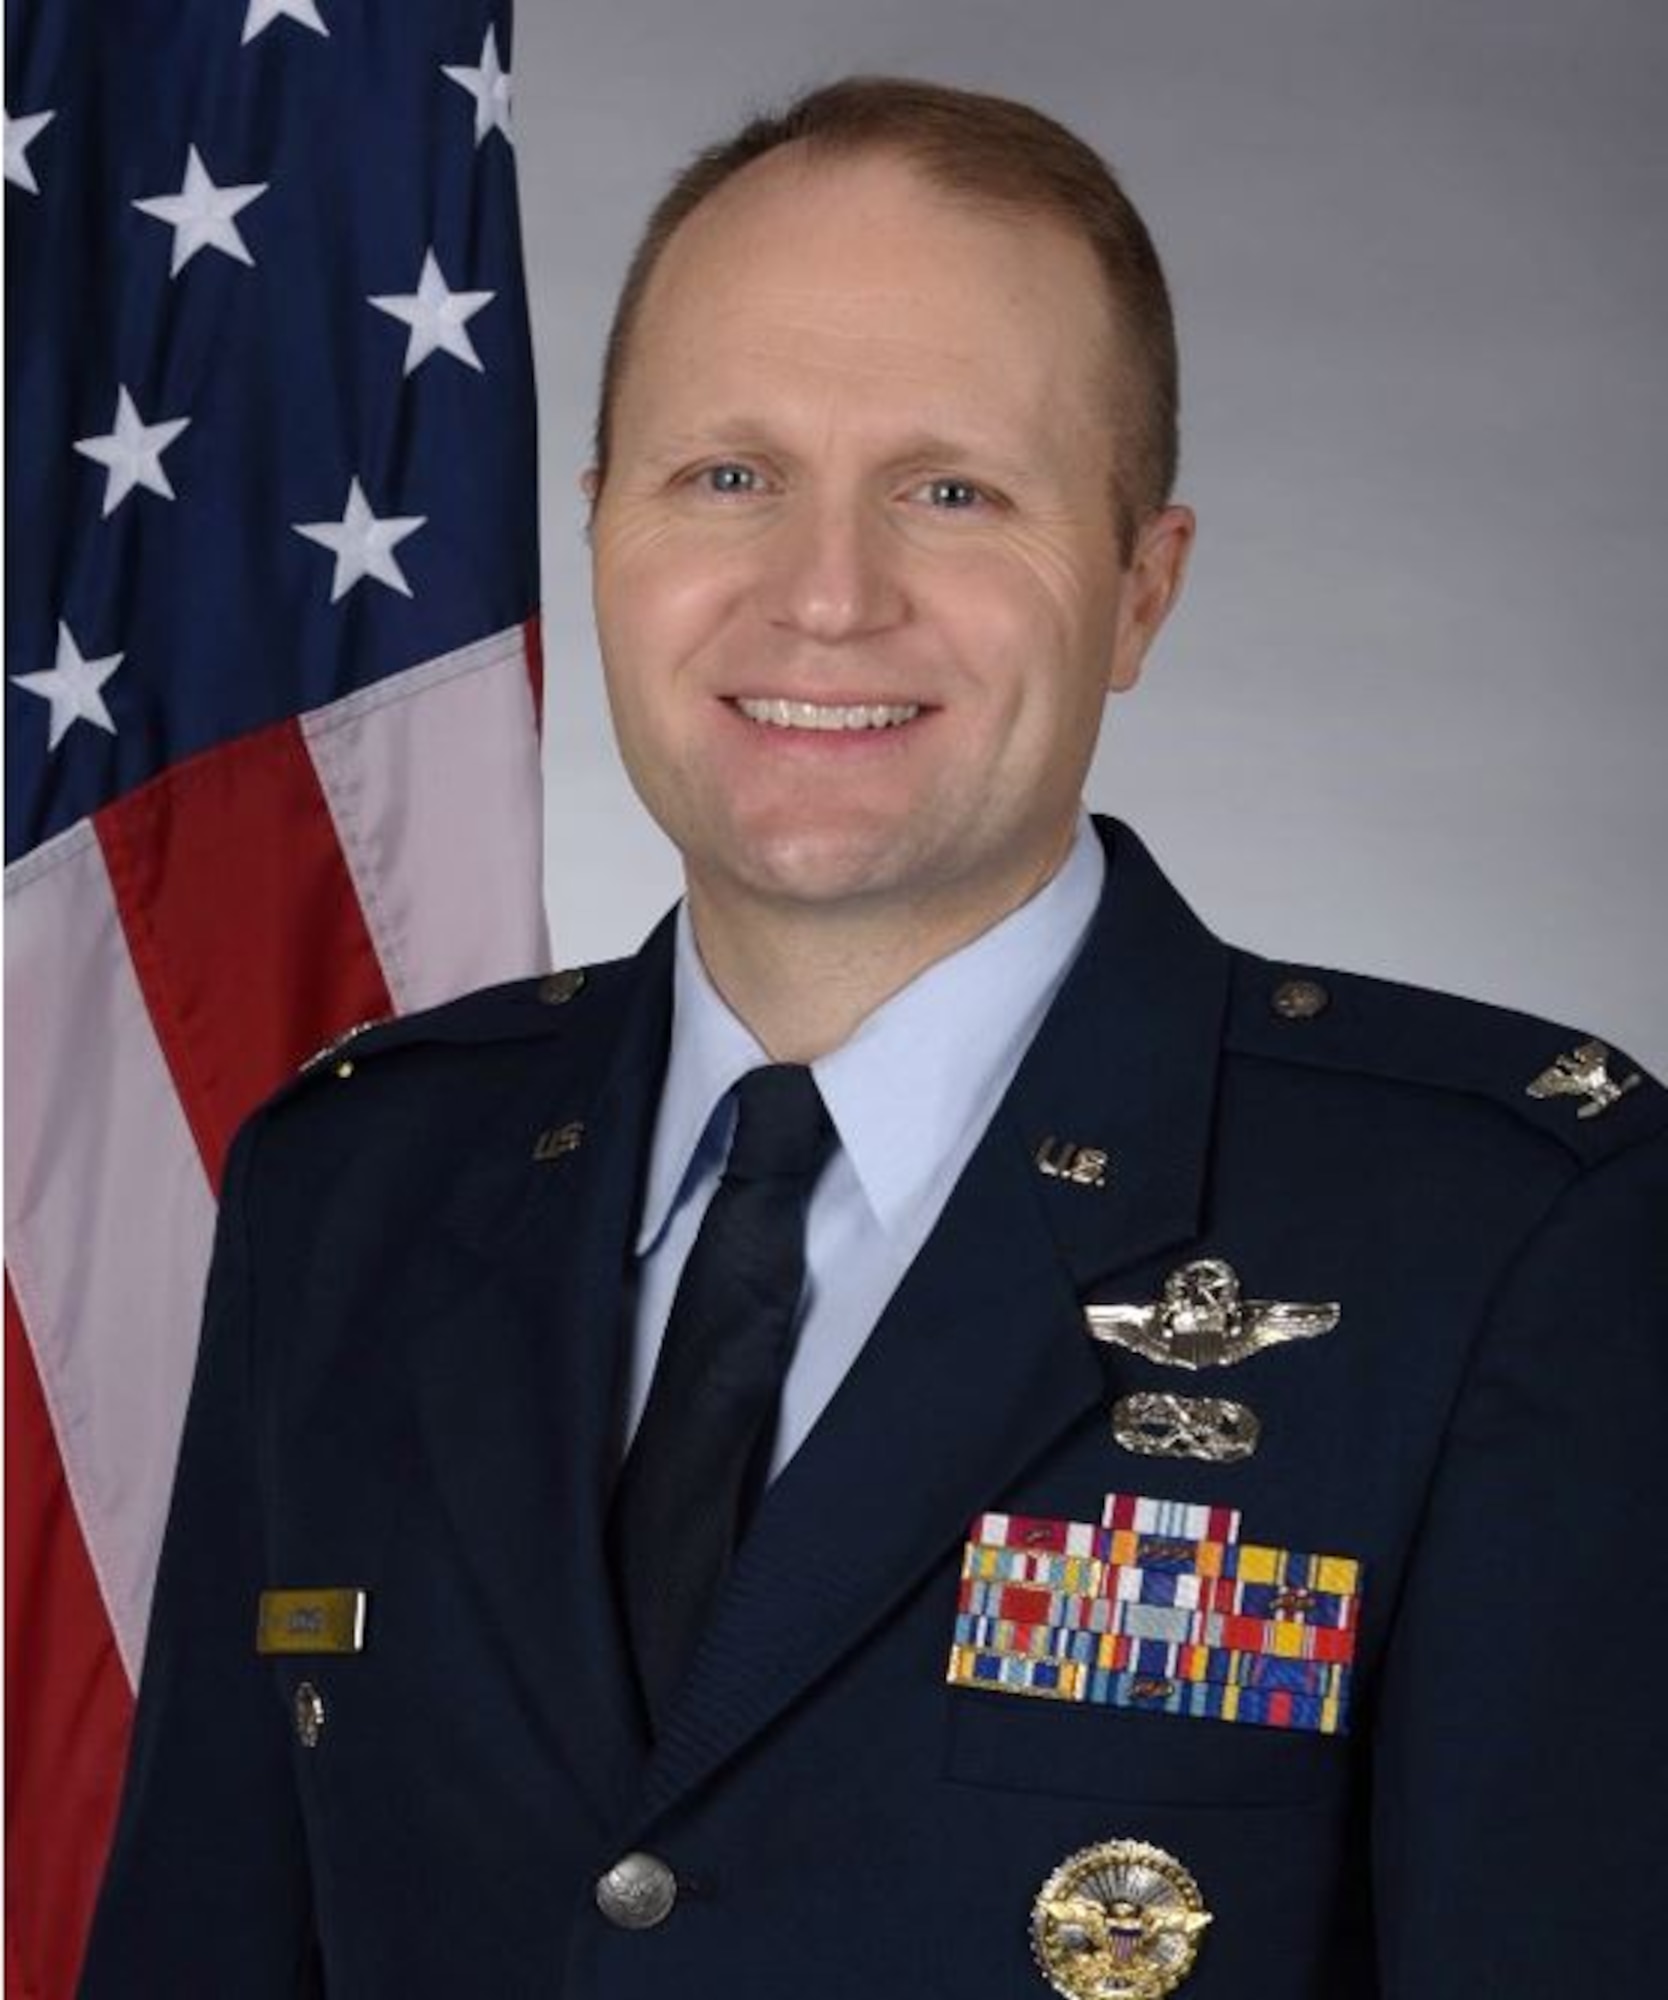 Vice Commander, 375th Air Mobility Wing, Scott AFB, Illinois